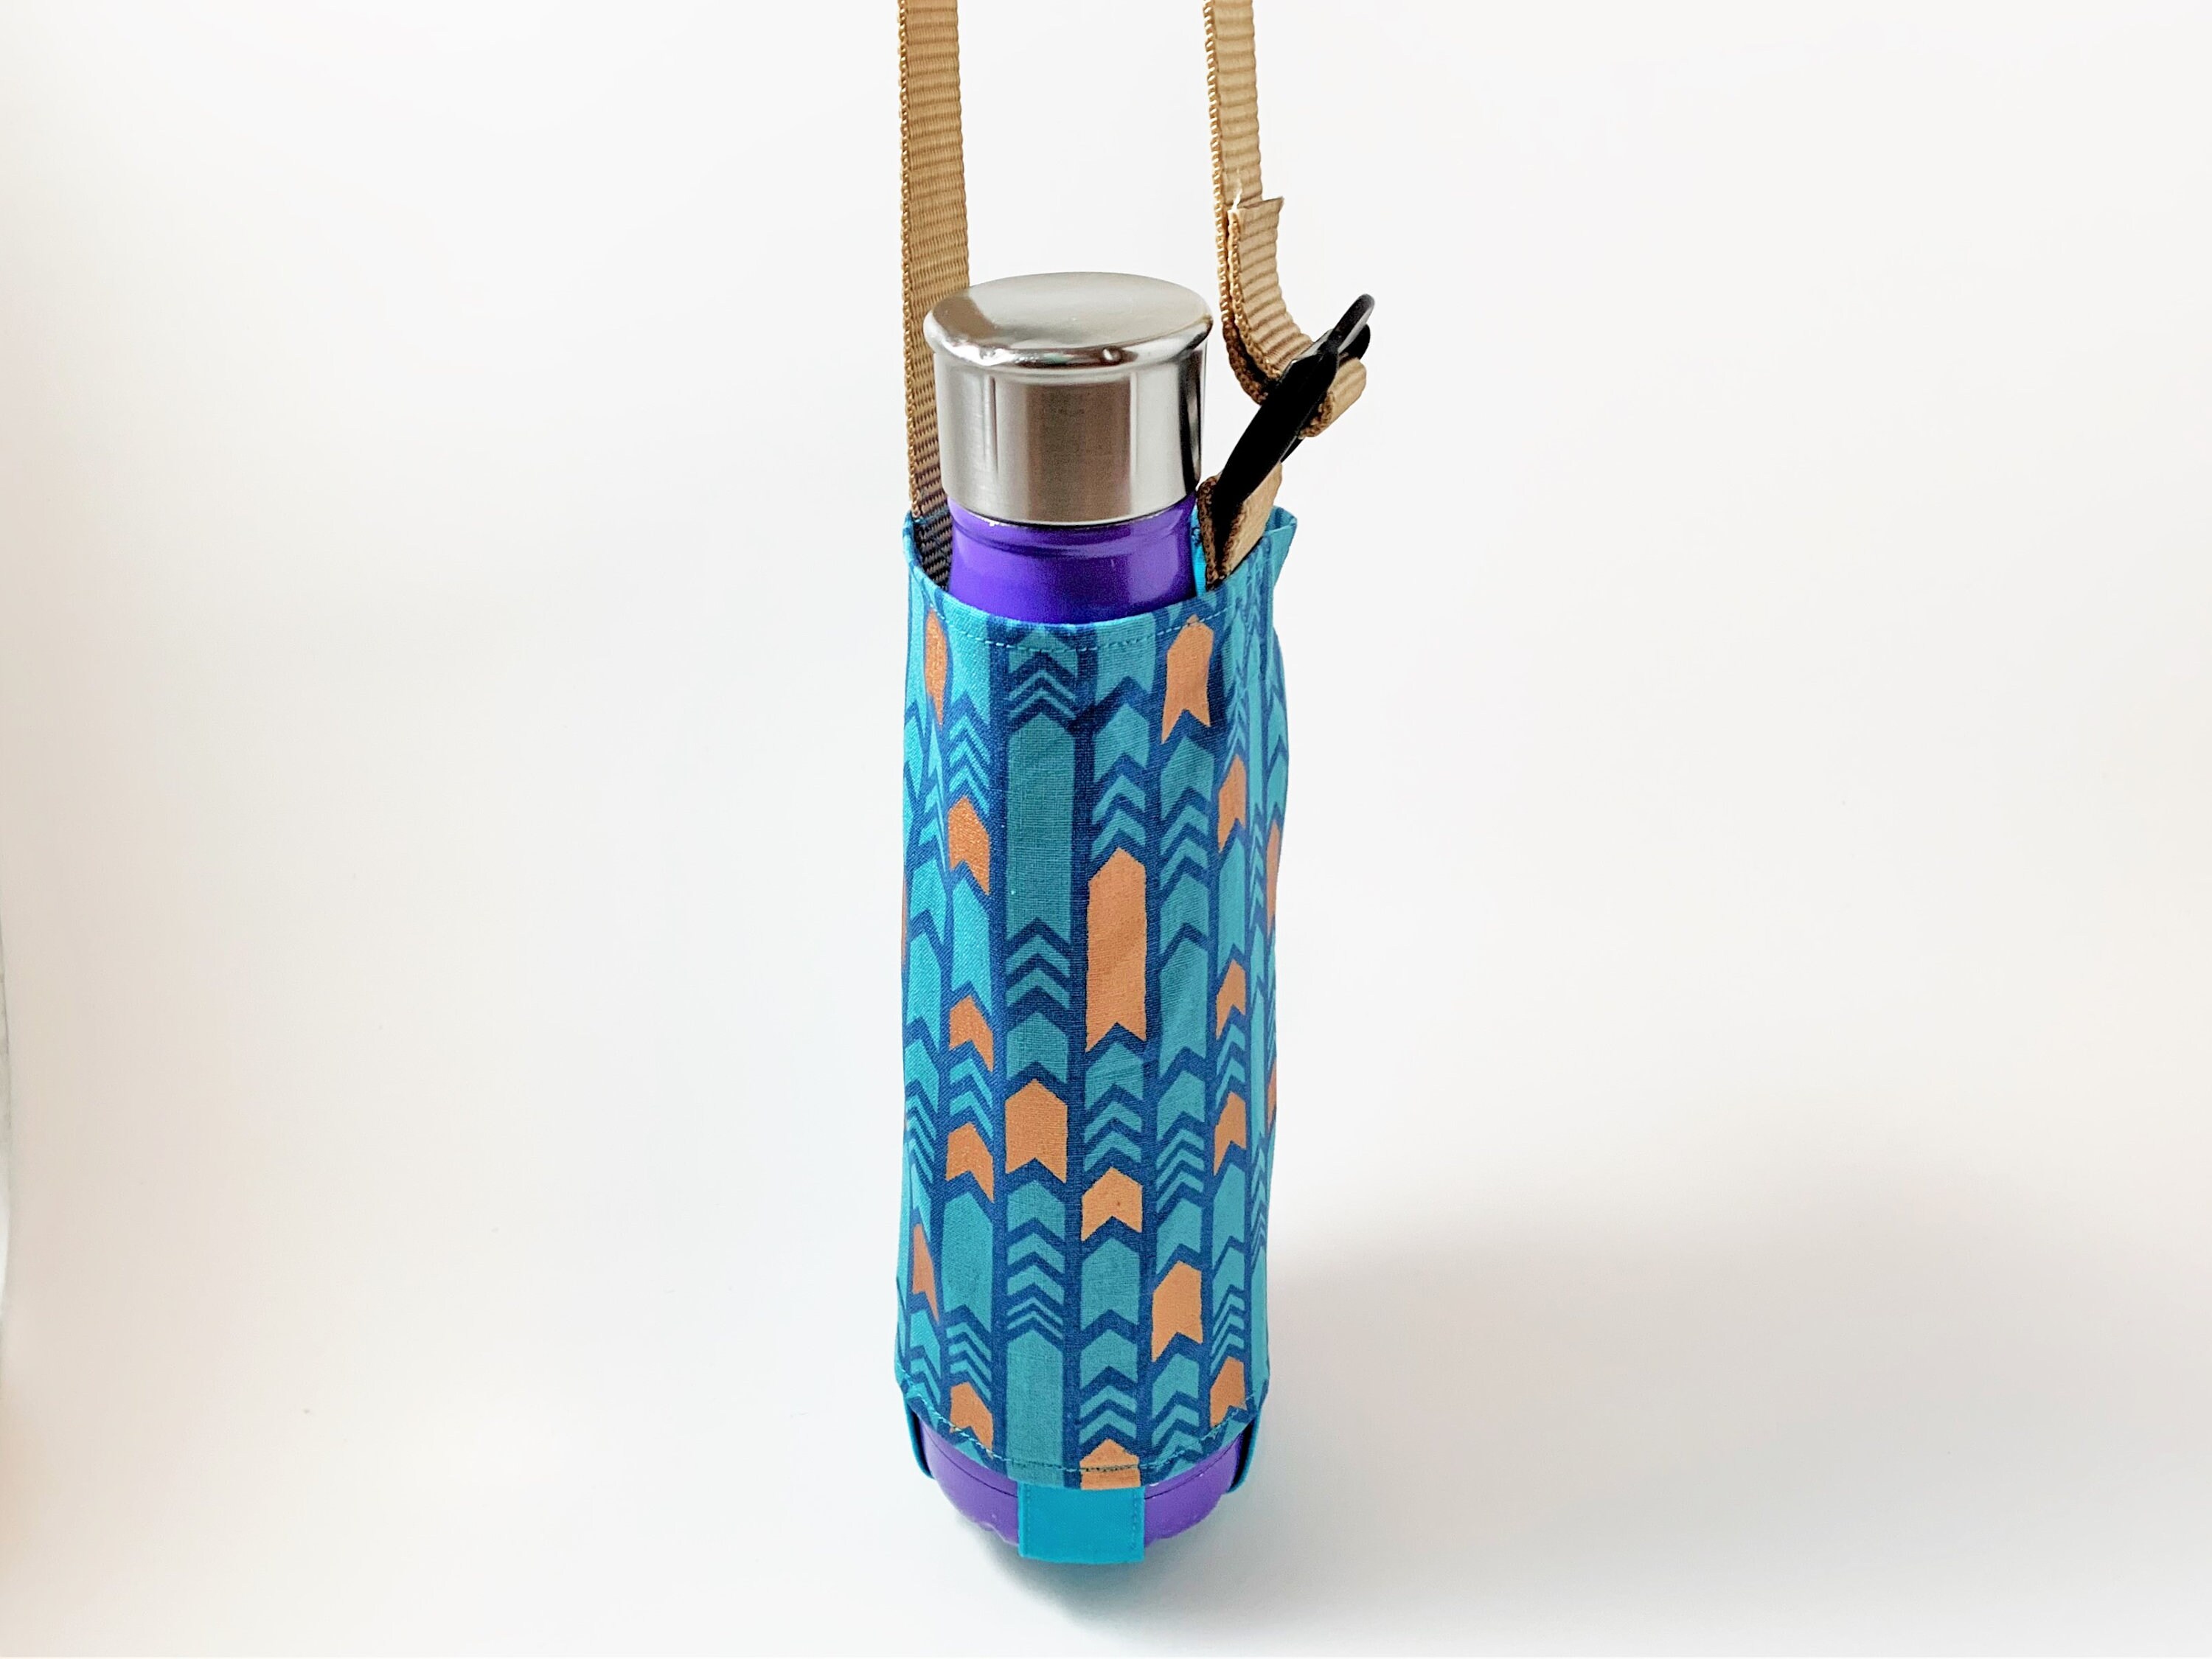 Teal and Gold Arrow/chevron Print Water Bottle Carrier With - Etsy